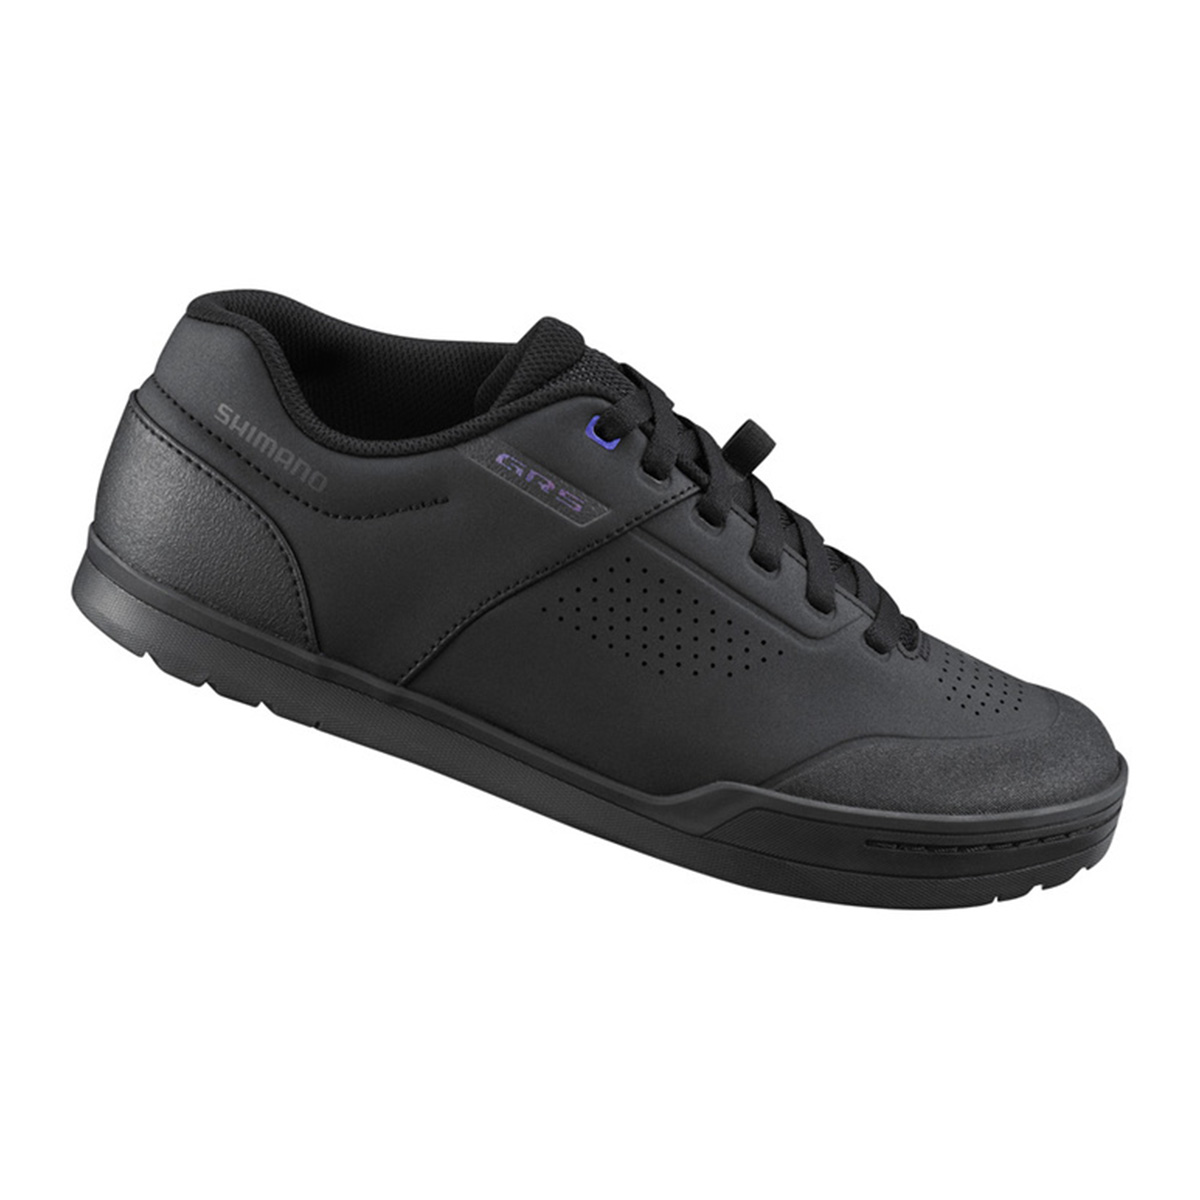 Chaussures Shimano GR501